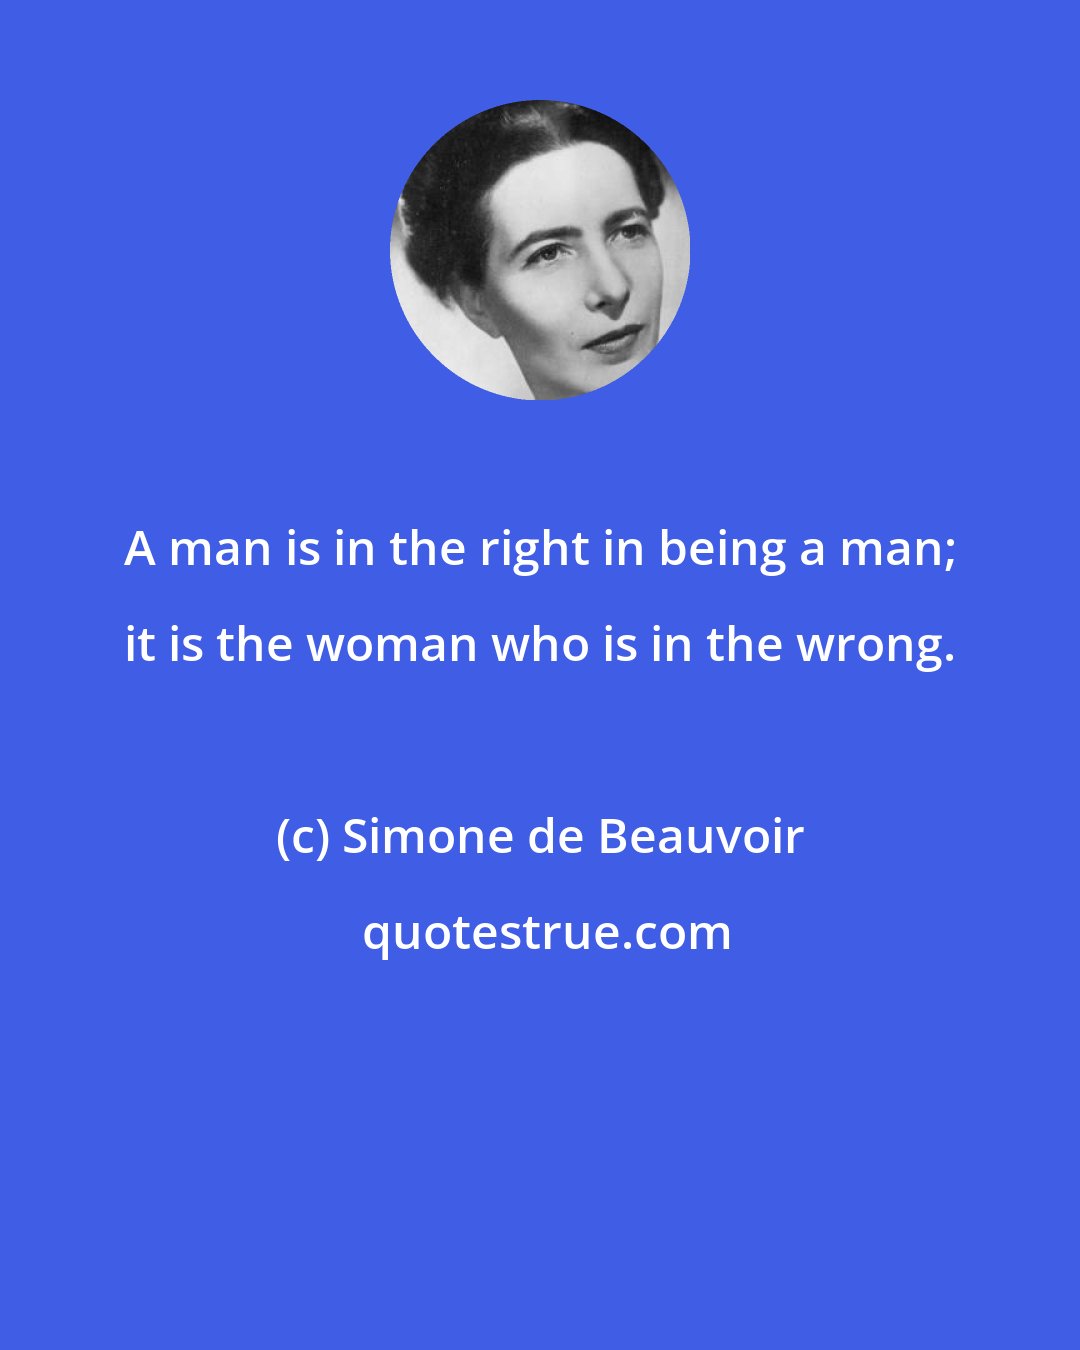 Simone de Beauvoir: A man is in the right in being a man; it is the woman who is in the wrong.